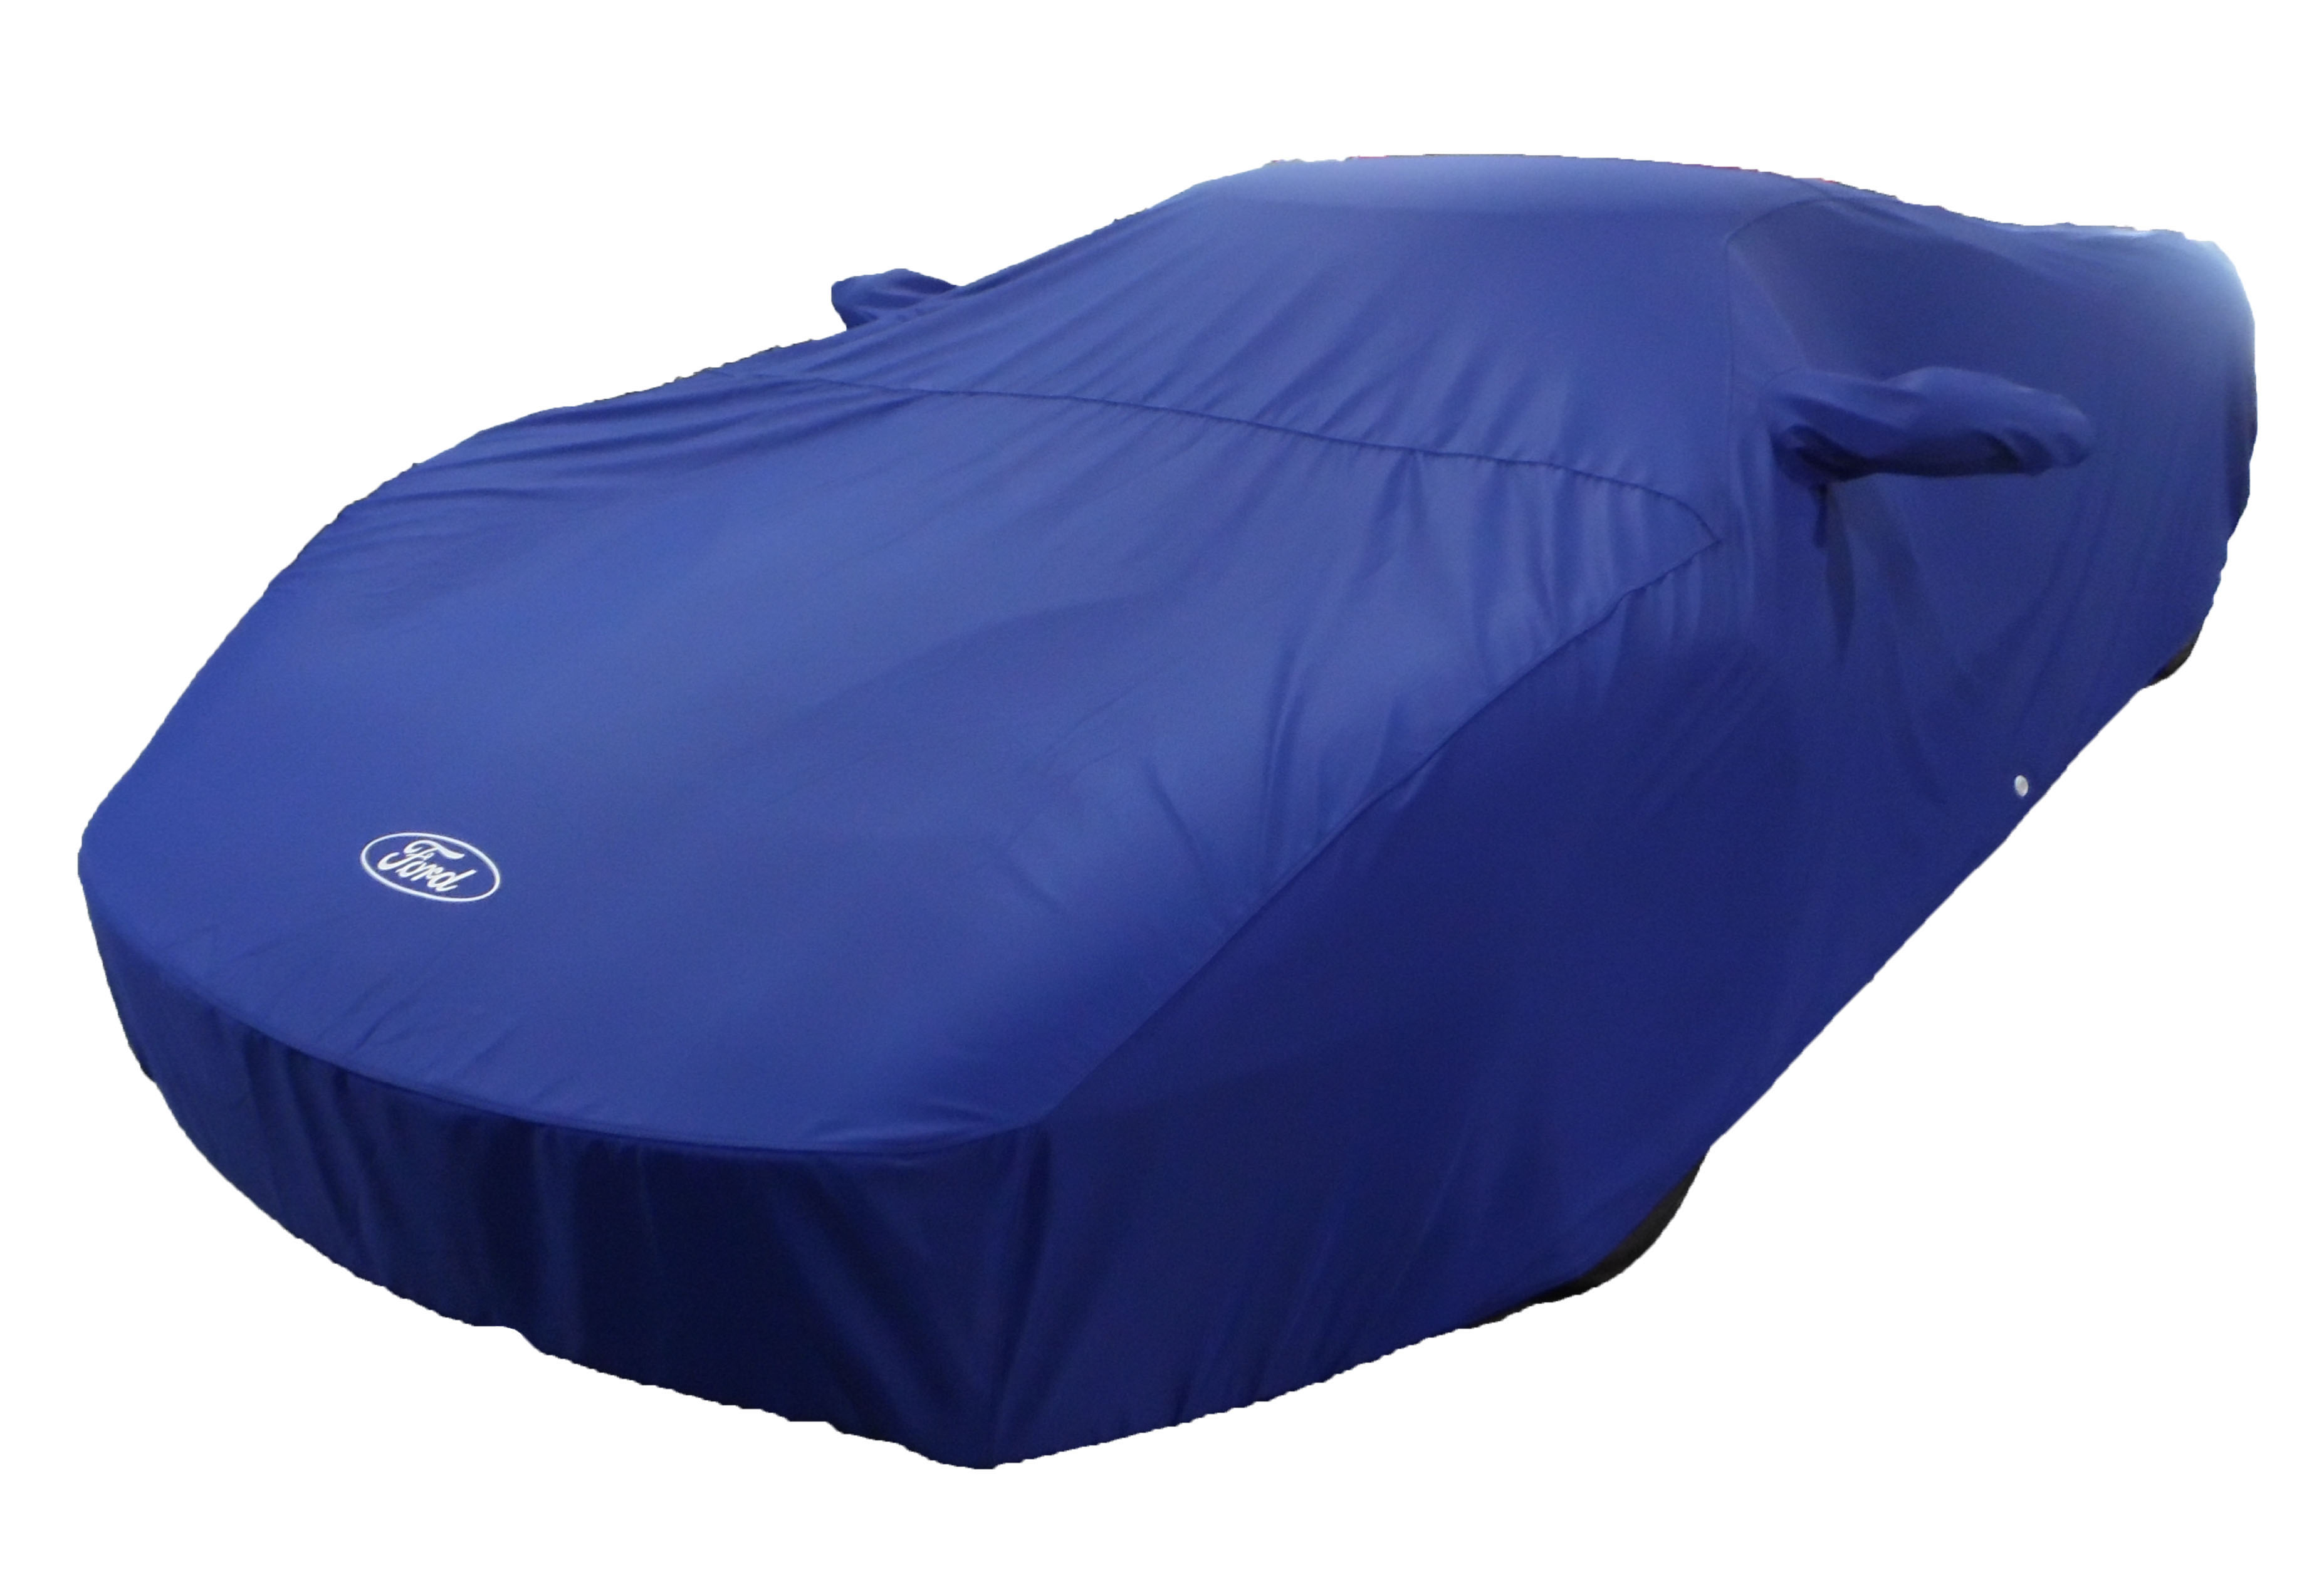 Image for Full Vehicle Cover - Blue, For Outdoor Use from AccessoriesCanada